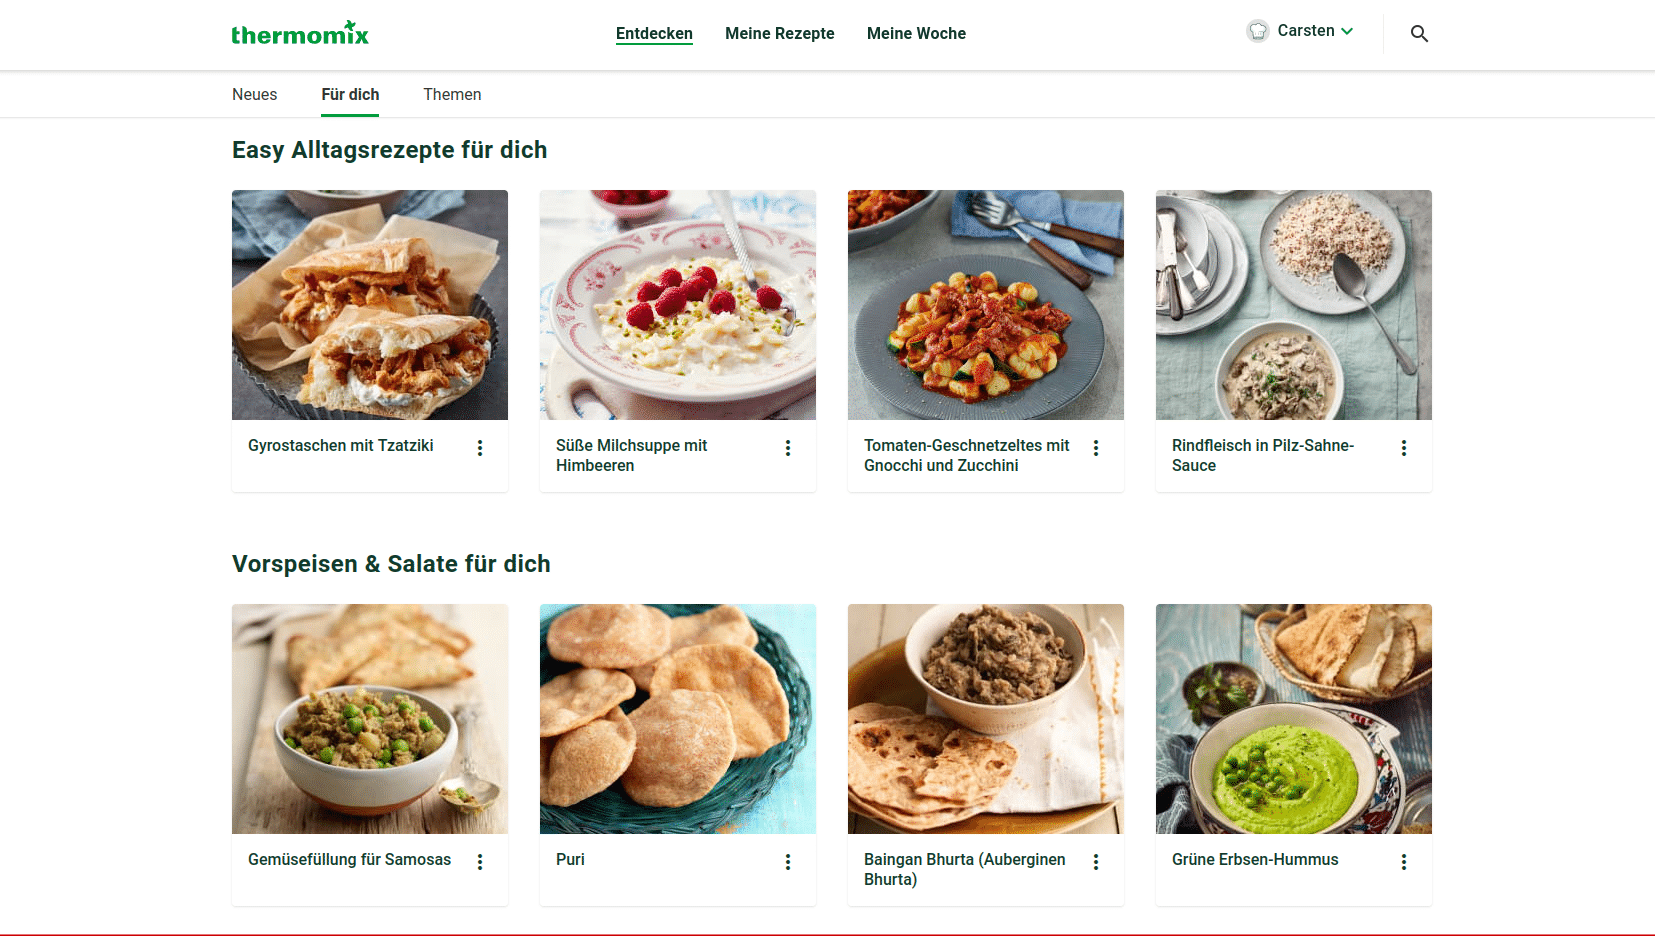 recipe recommender system for the Thermomix on Cookidoo